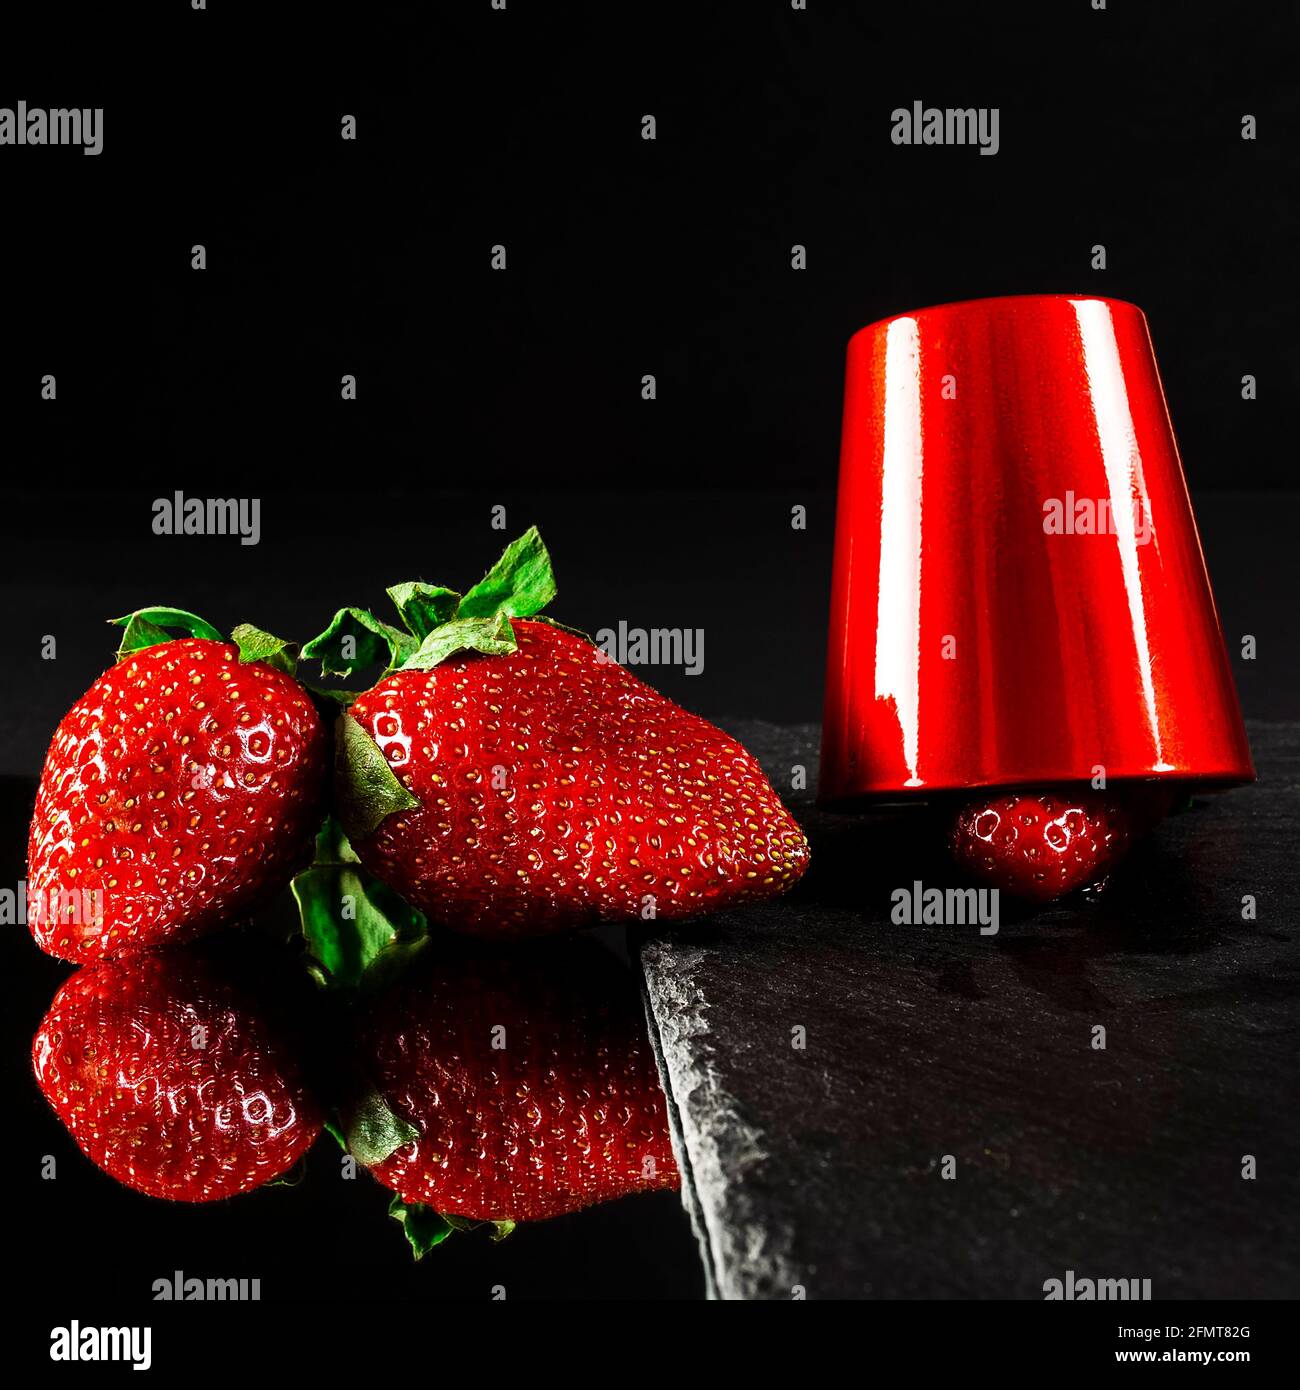 Two fresh red strawberries reflected on a mirror and a red strawberry under a red cup on a slate base.The photograph is a still life taken with artifi Stock Photo